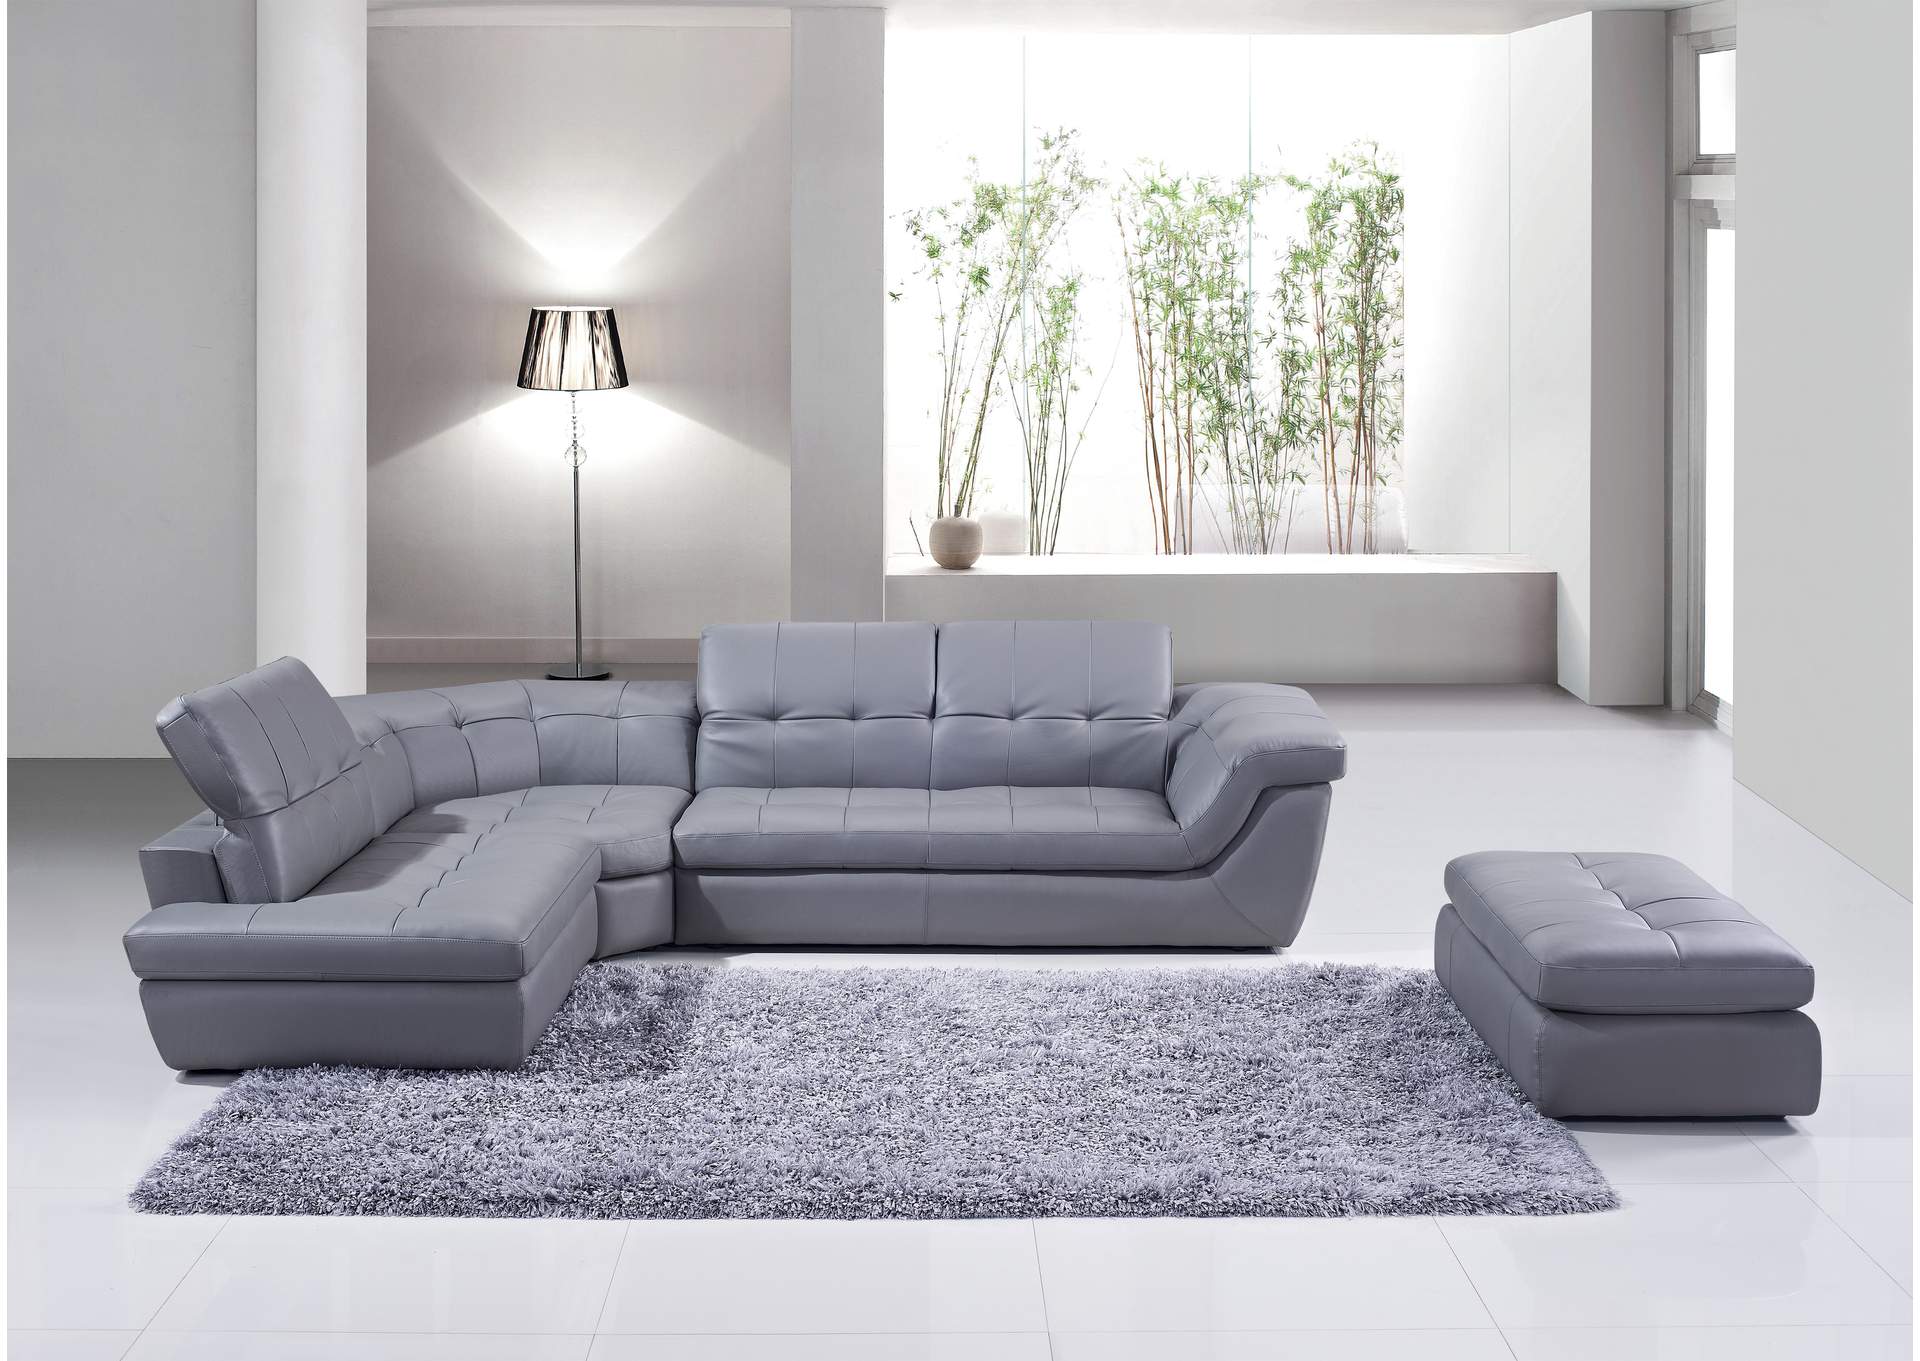 397 Italian Leather Sectional Grey, Italian Leather Sectional With Chaise